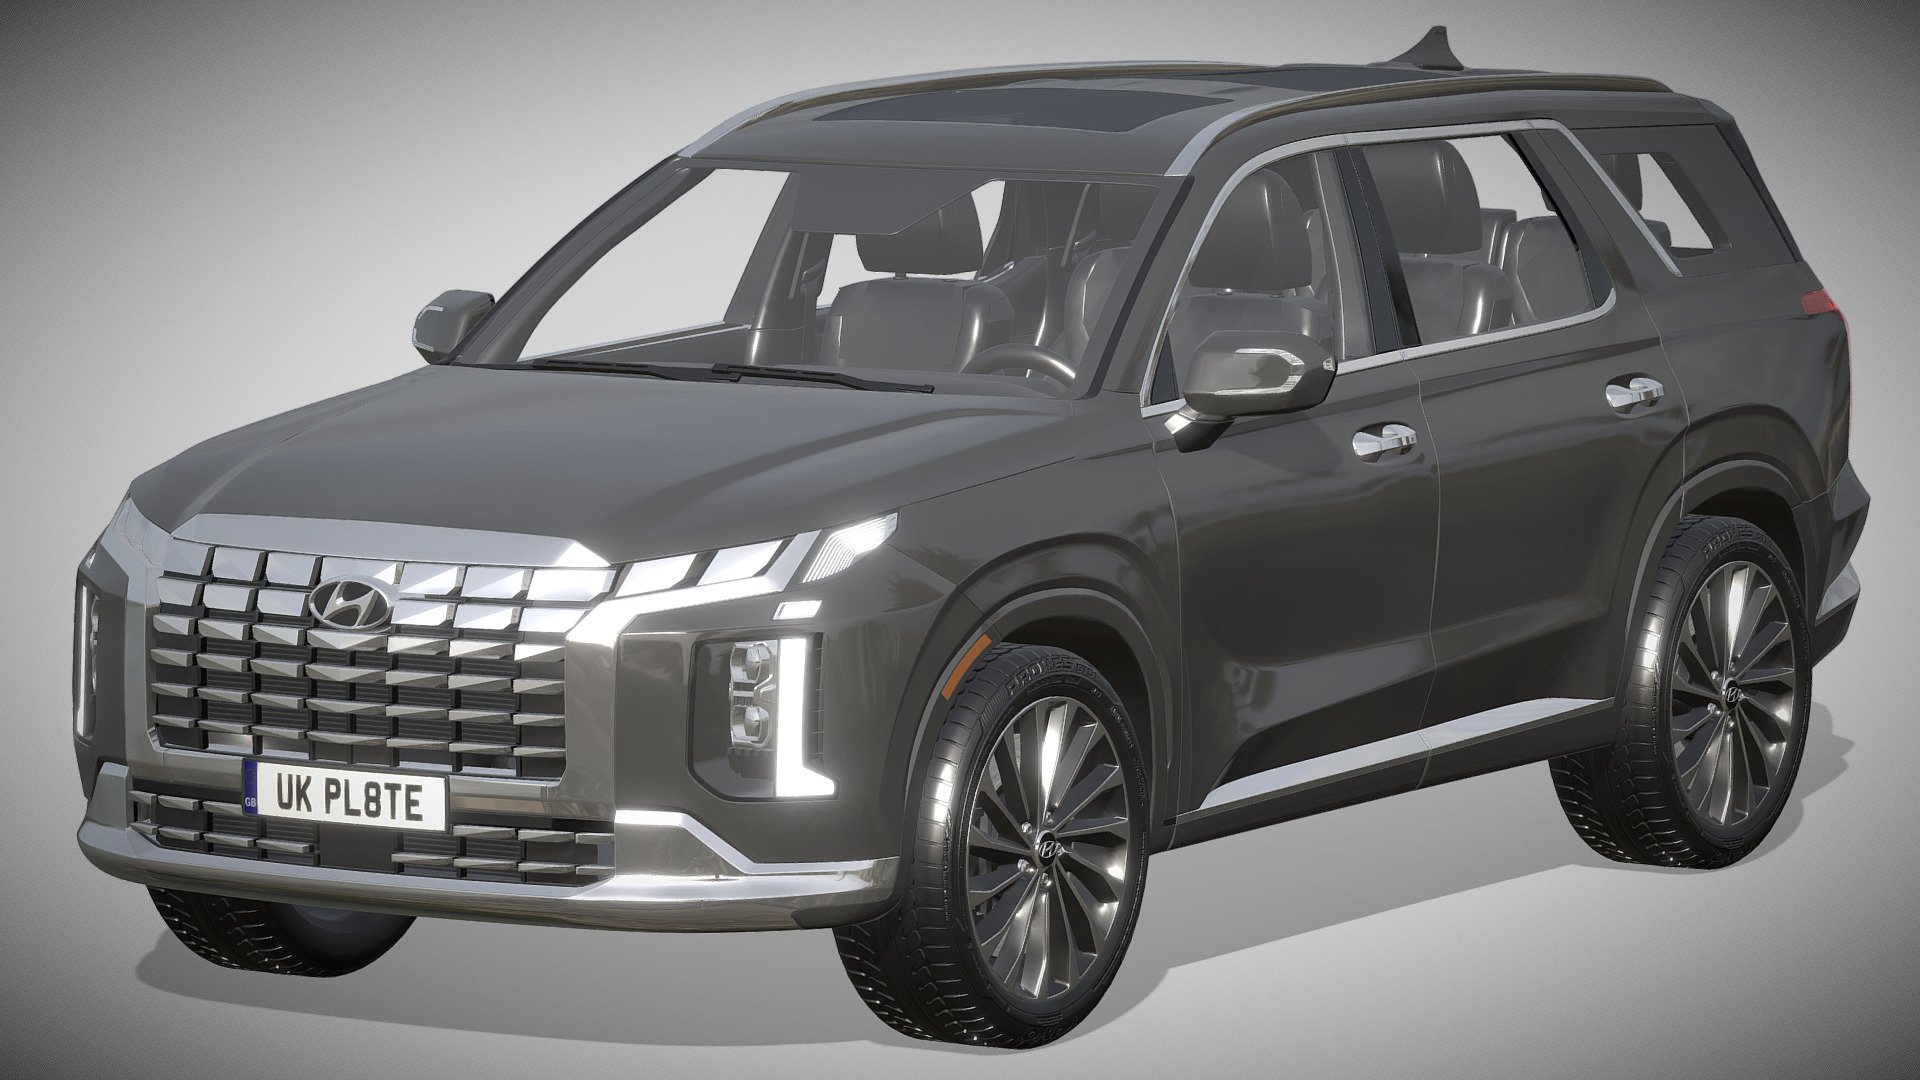 Hyundai Palisade 2023

https://www.hyundaiusa.com/us/en/vehicles/palisade

Clean geometry Light weight model, yet completely detailed for HI-Res renders. Use for movies, Advertisements or games

Corona render and materials

All textures include in *.rar files

Lighting setup is not included in the file! - Hyundai Palisade 2023 - Buy Royalty Free 3D model by zifir3d 3d model